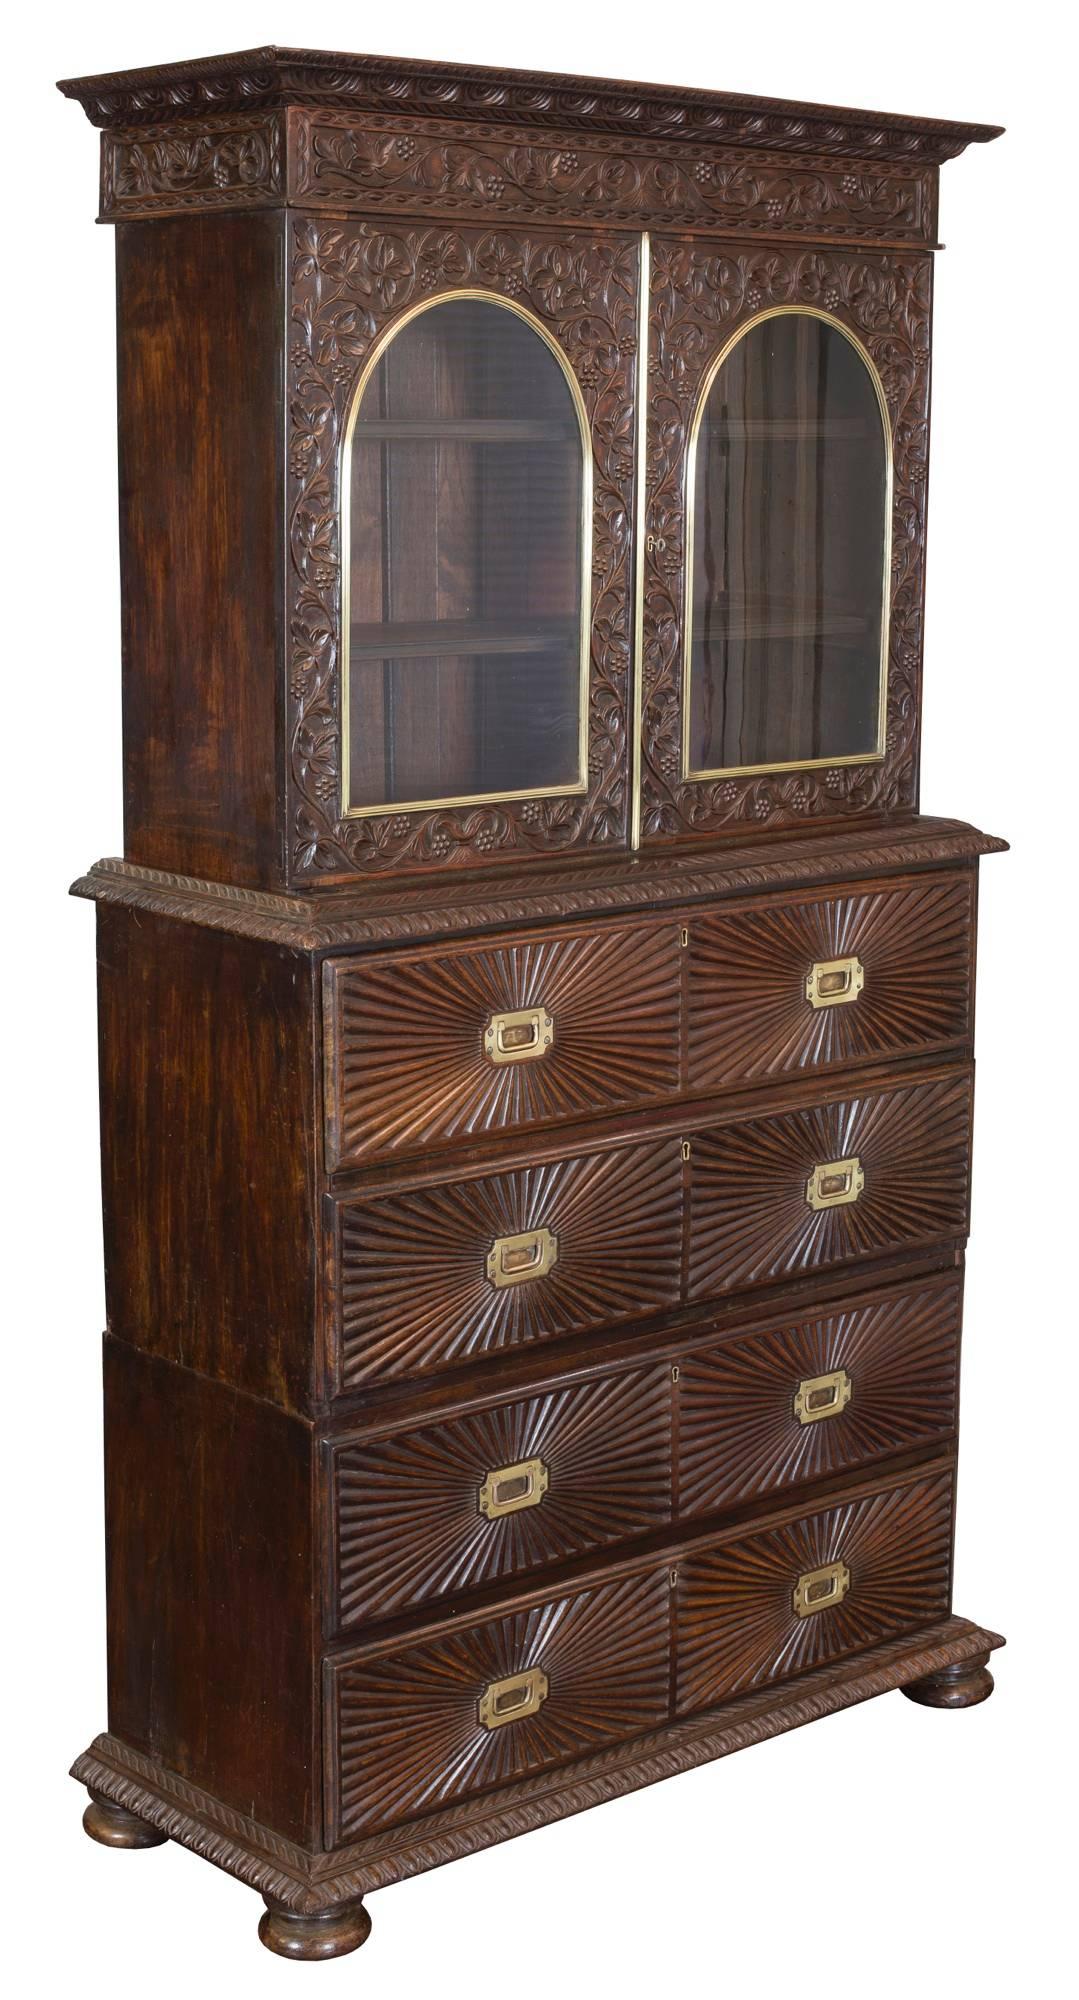 This secretary is crafted from rich, dense rosewood exhibiting the fluted sunburst motif and gadrooned edging. A chest of this grouping was offered recently by a local dealer. The carving in the upper case is of the finest quality. Note the very